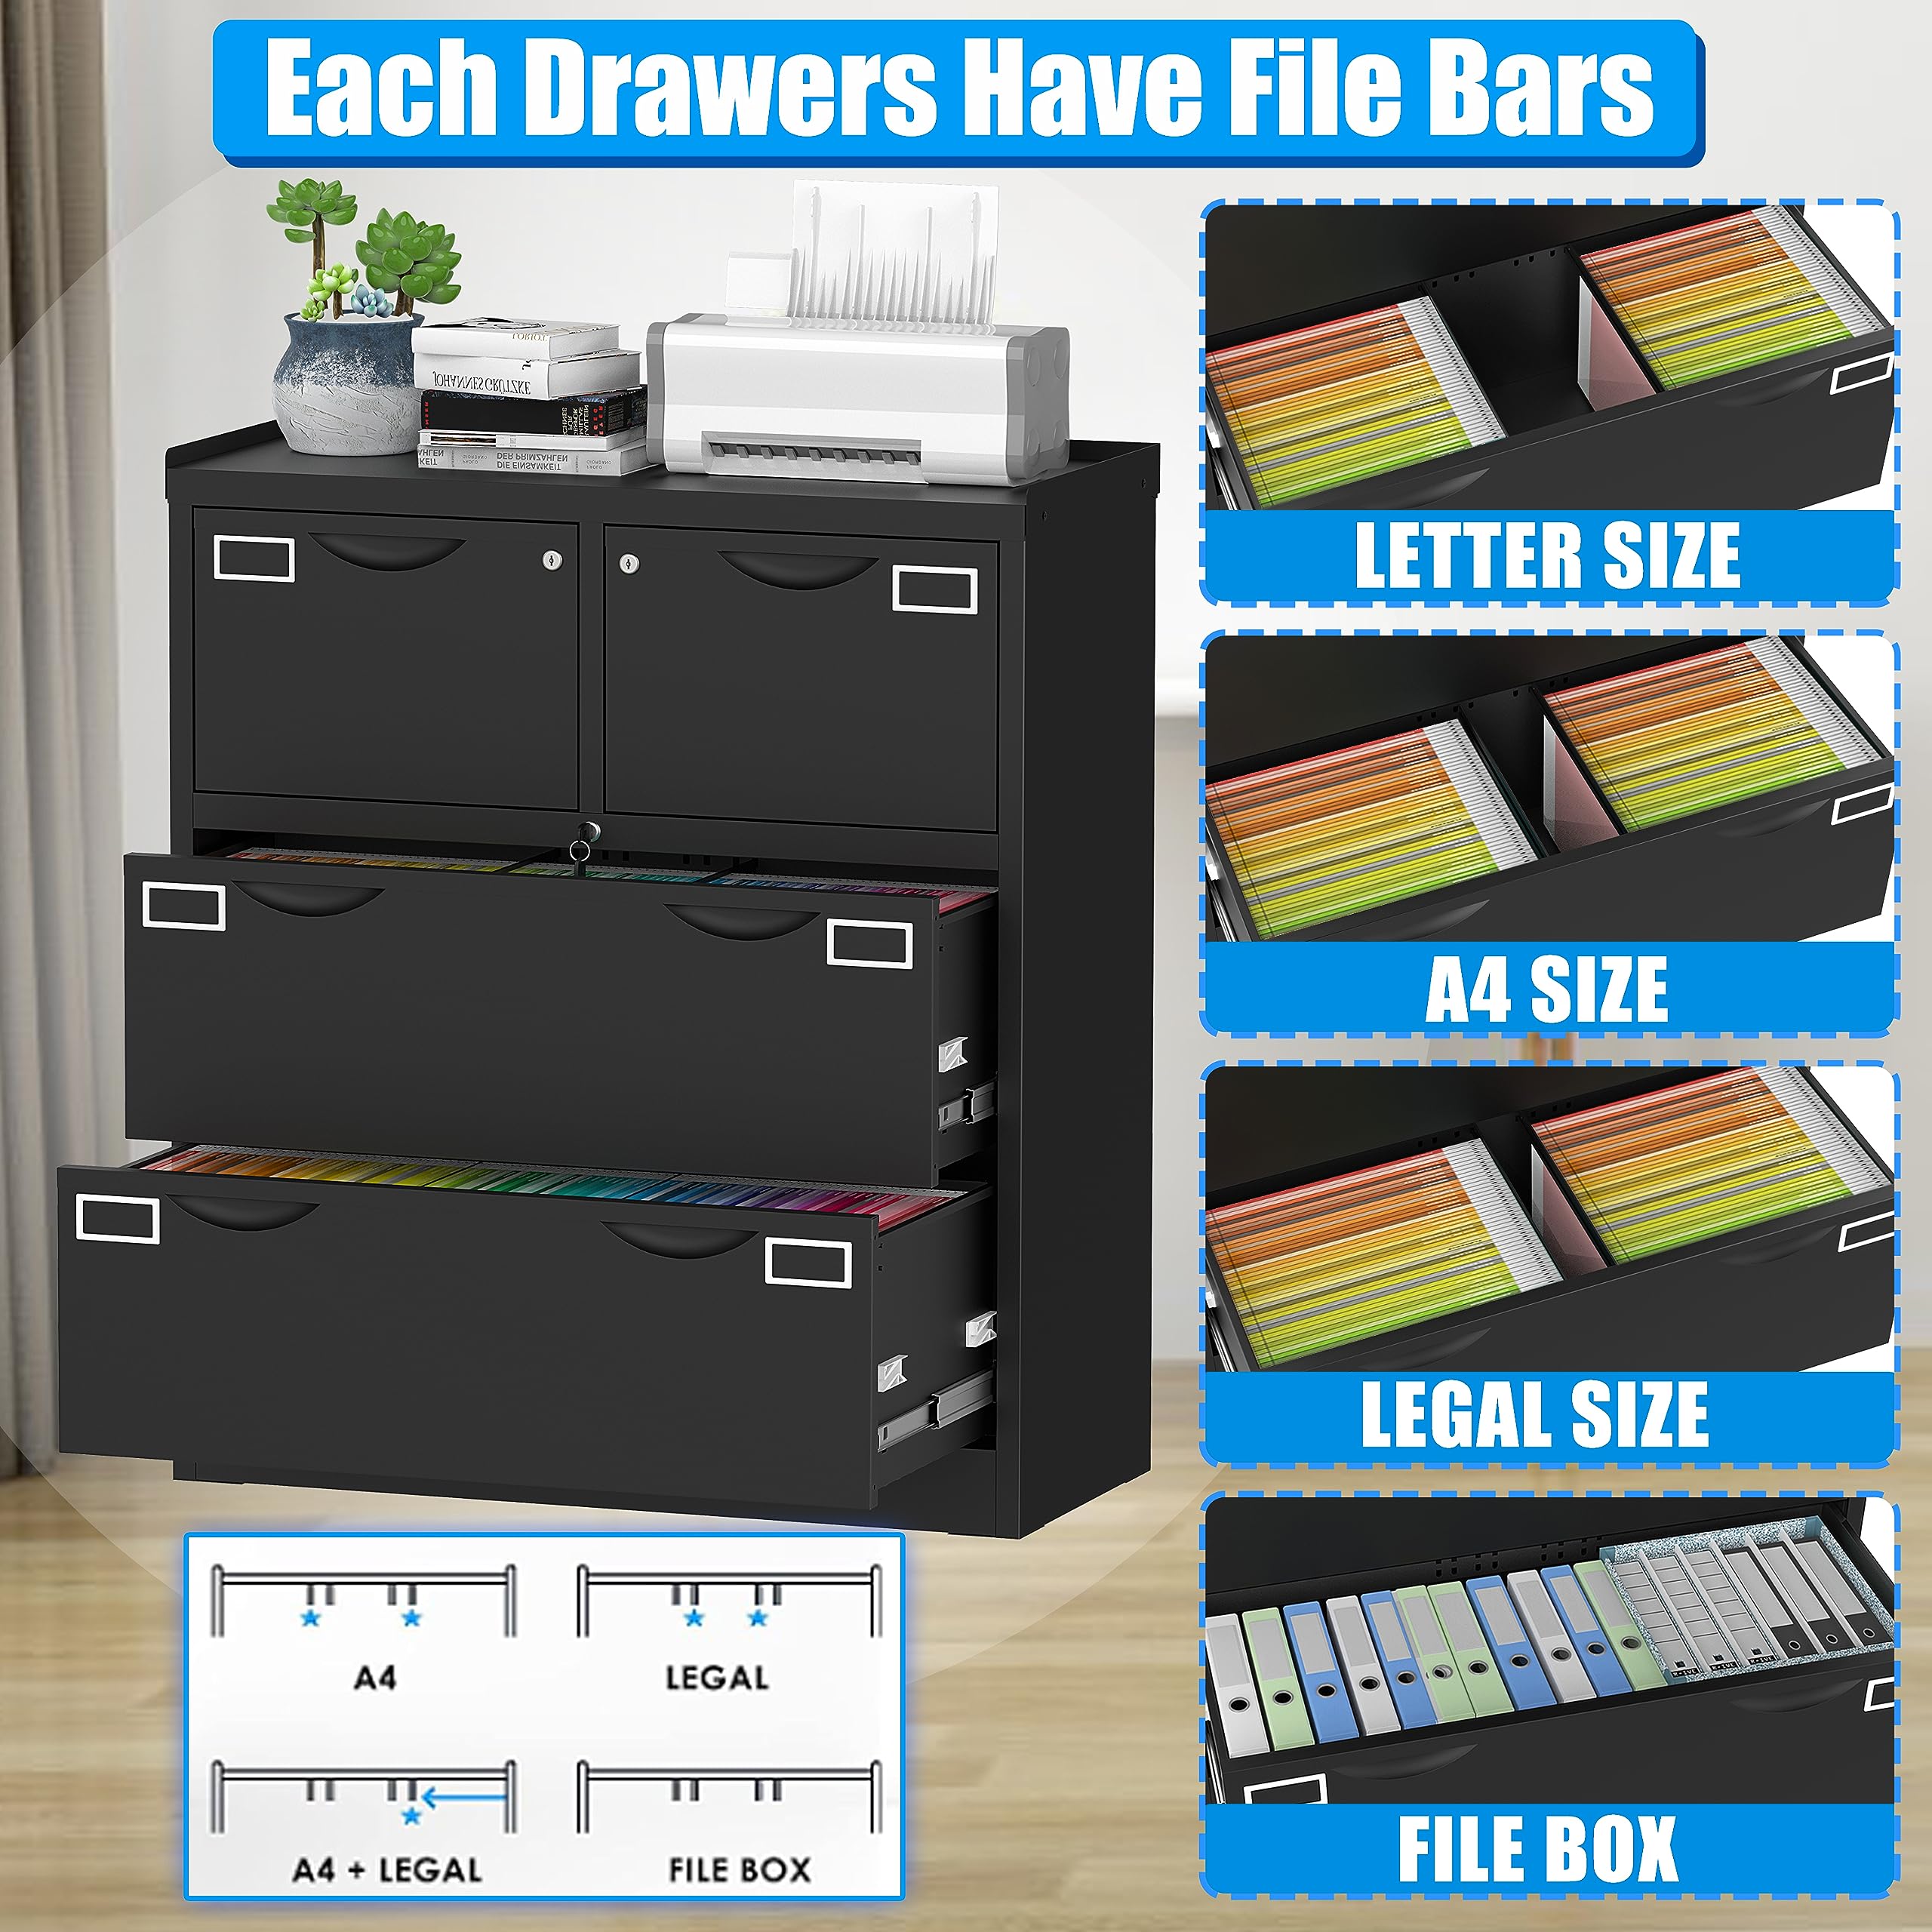 3 Drawer Lateral File Cabinet with Lock Metal Filing Storage Cabinet for A4 Legal/Letter Size File Cabinet Locked Steel Lateral File Drawers,Wide Filing Organization Storage Cabinets for Home Office